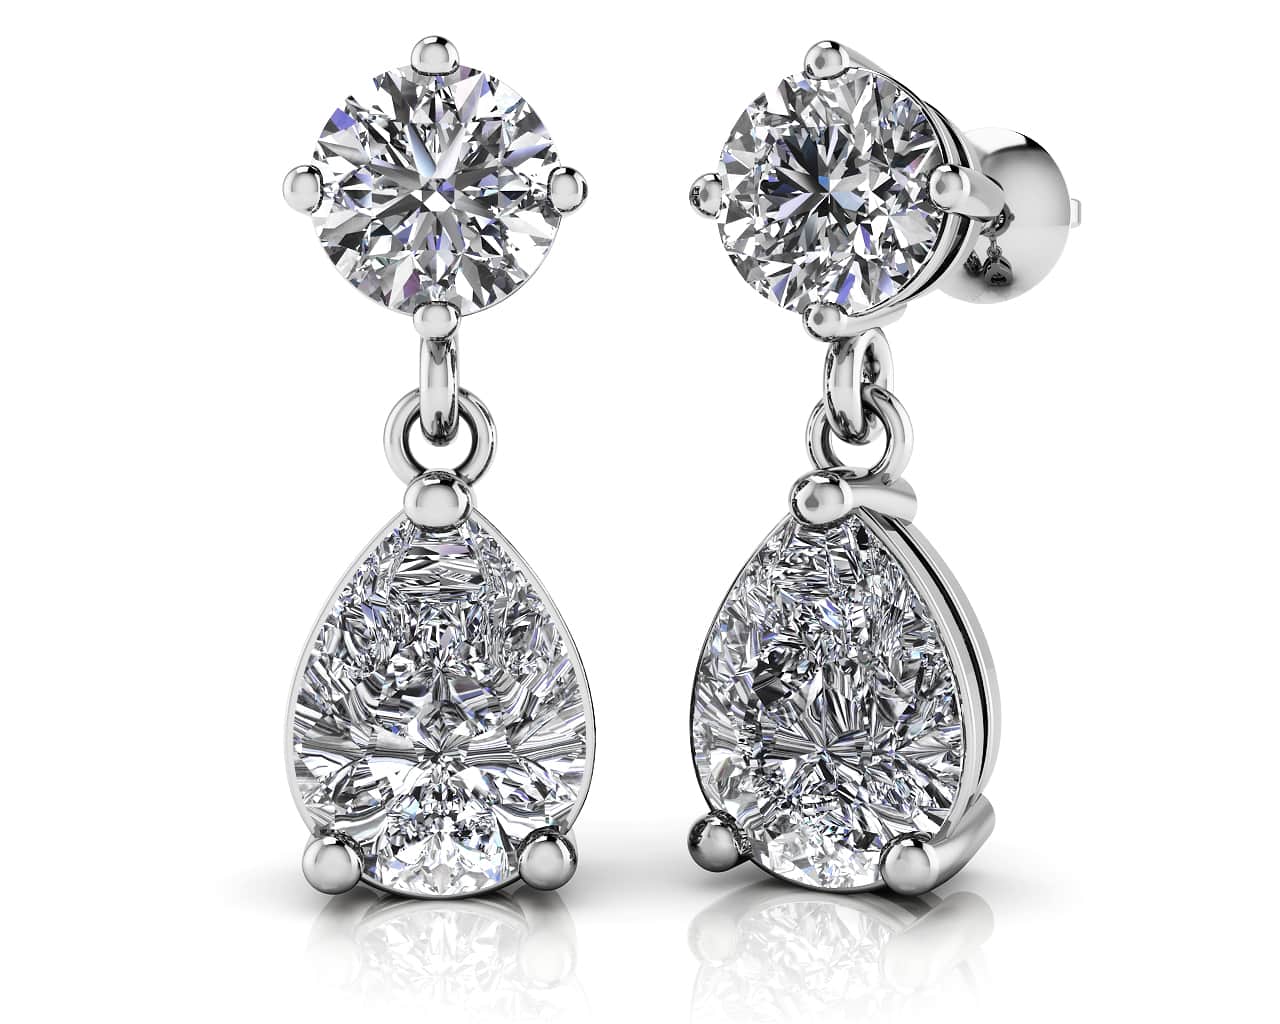 Alluring Round And Pear Shaped Drop Earrings 1.42 Carat Total Weight